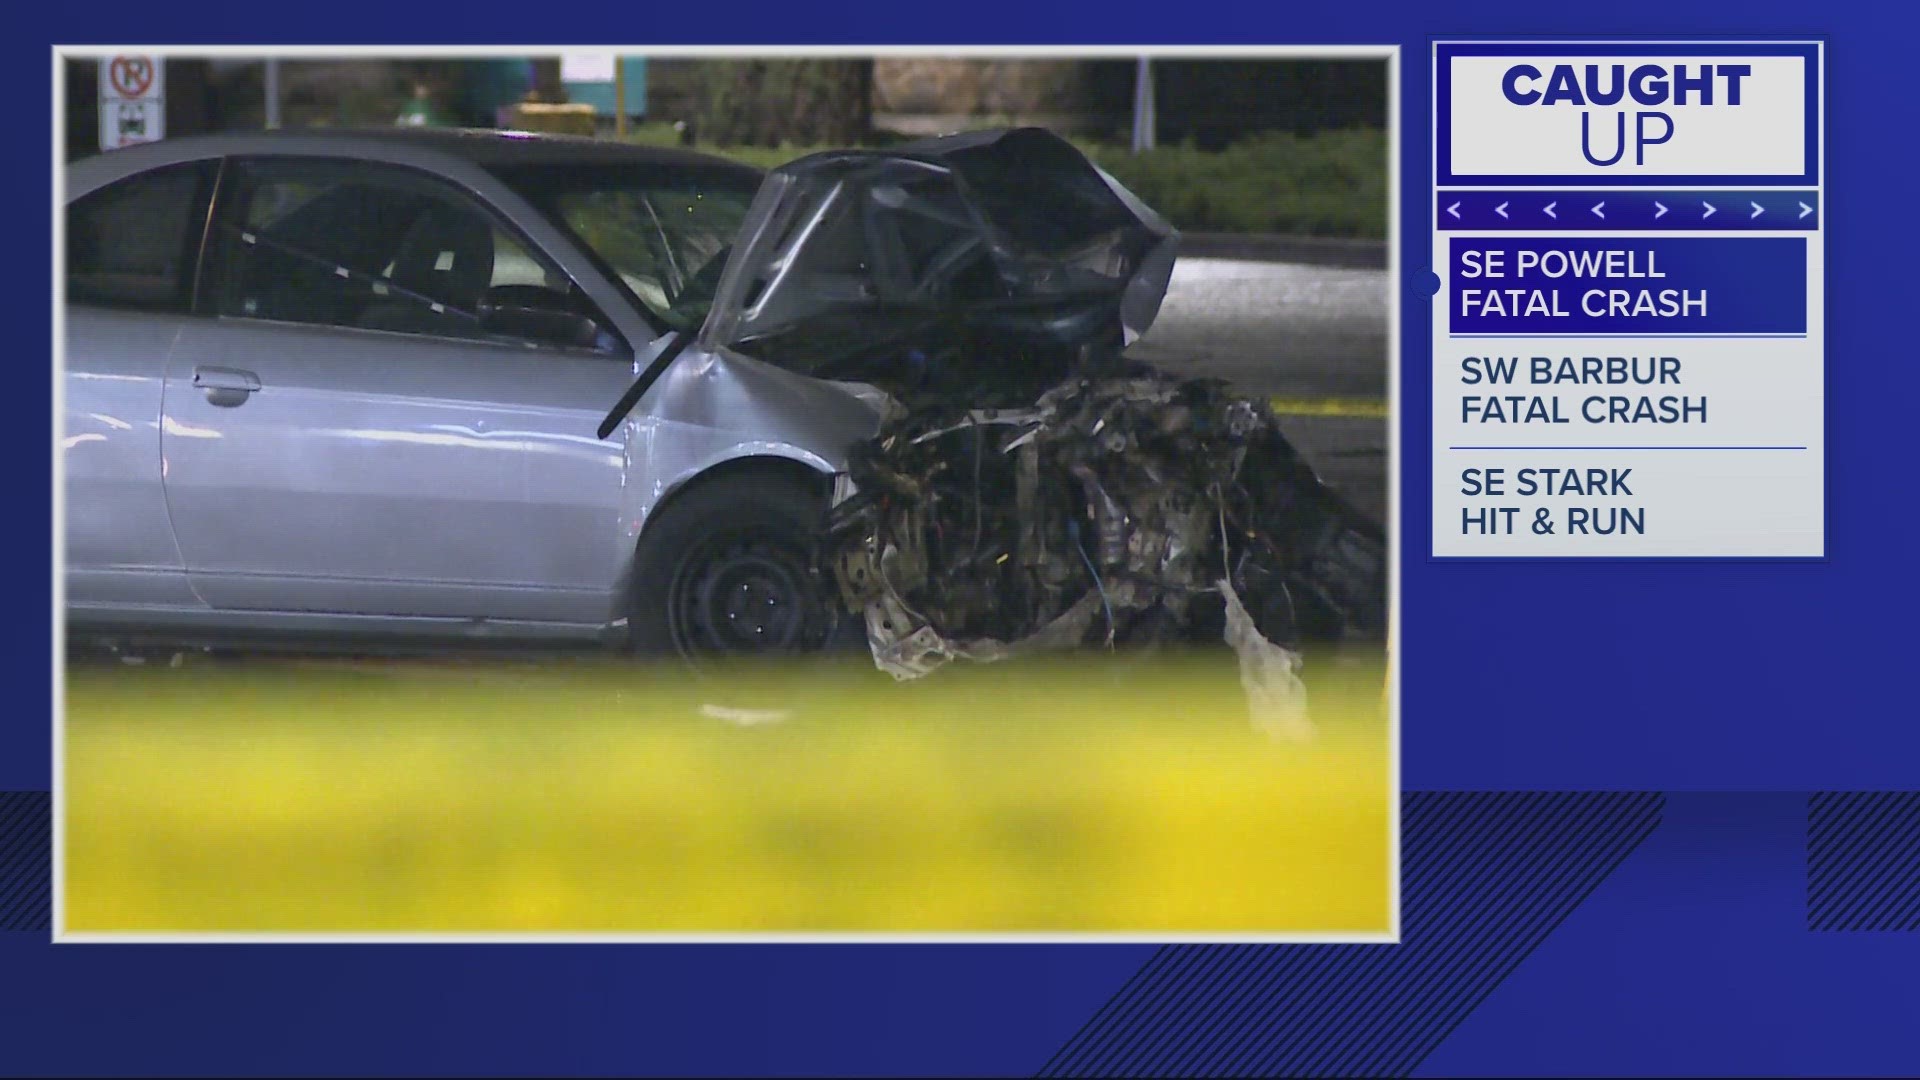 This is the third fatal crash in the City of Portland on Christmas Day, according to the Portland Police Bureau.